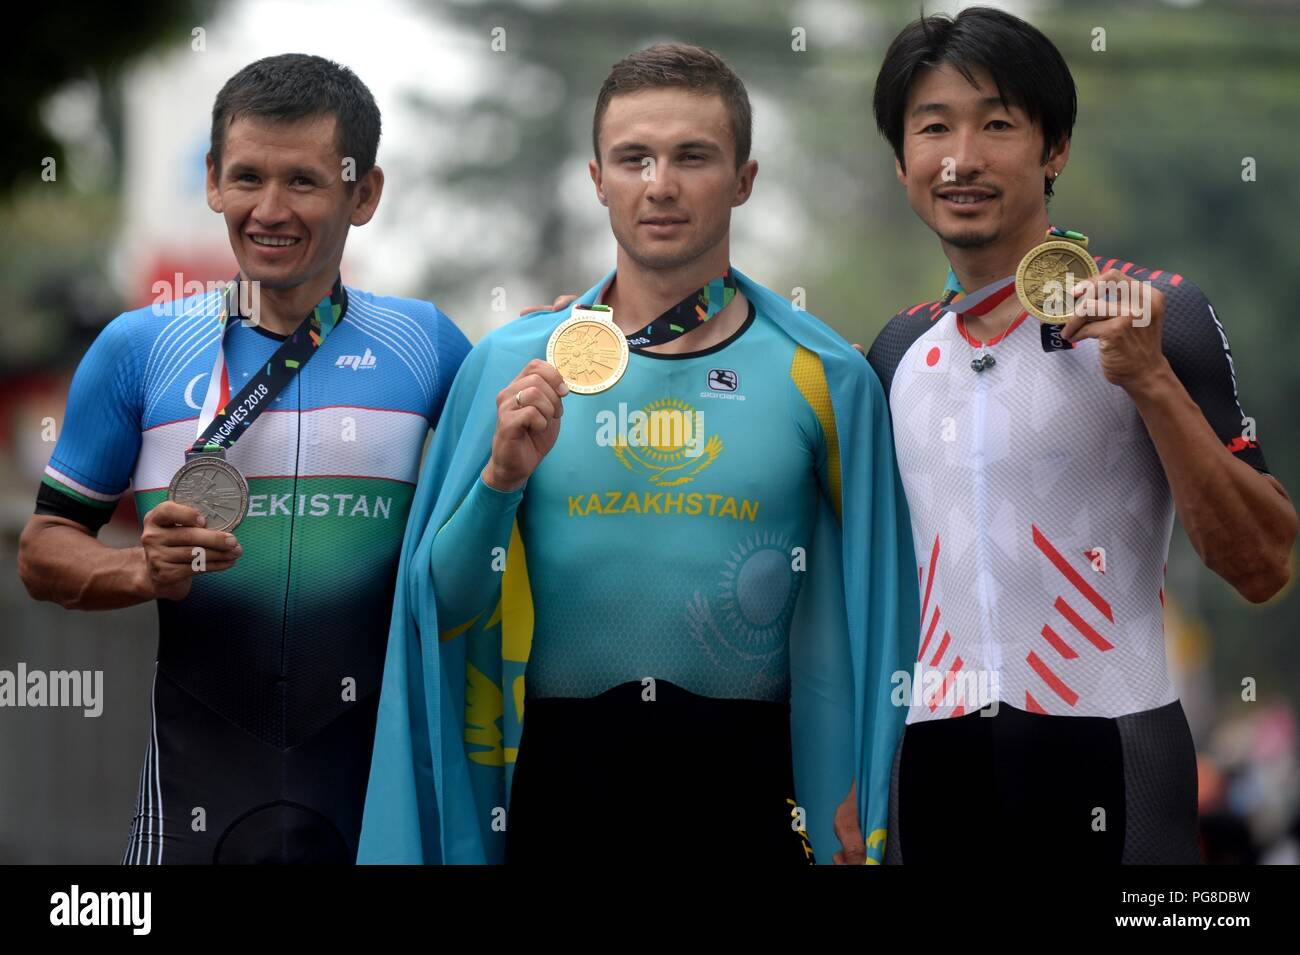 Subang, Indonesia. 24th Aug, 2018. Gold medalist Alexey Lutsenko (C) of Kazakhstan, Muradjan Khalmuratov (L) of Uzbekistan and Beppu Fumiyuki of Japan pose for photos during the awarding ceremony of the men's 40km individual time trial of cycling road event at the 18th Asian Games in Subang, West Java, Indonesia, Aug. 24, 2018. Credit: Agung Kuncahya B./Xinhua/Alamy Live News Stock Photo